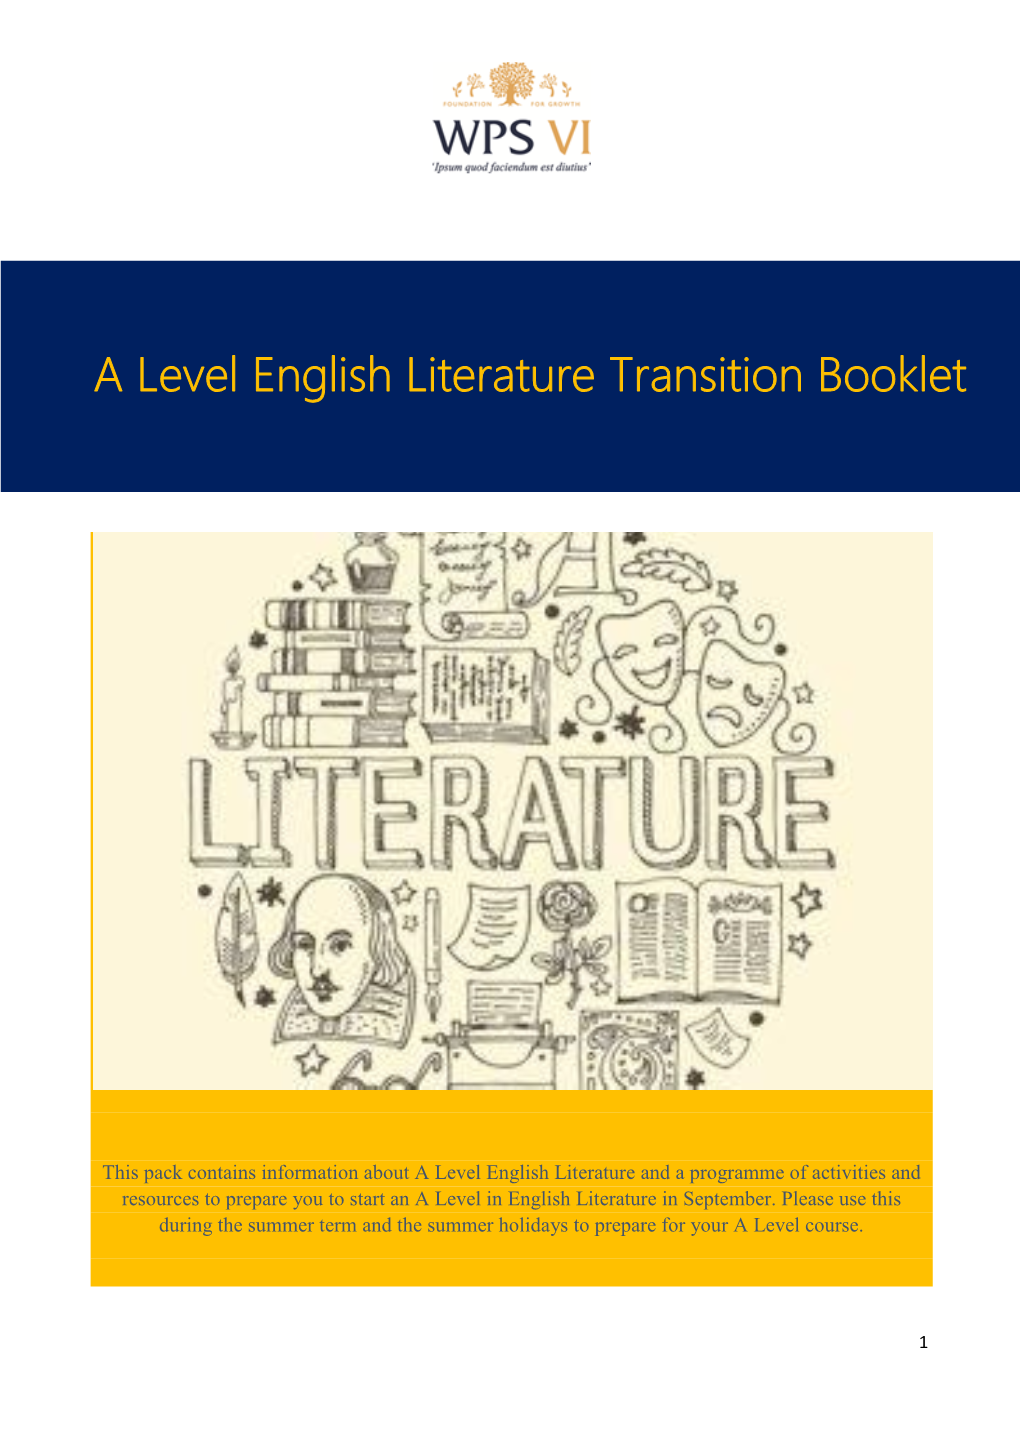 A Level English Literature Transition Booklet